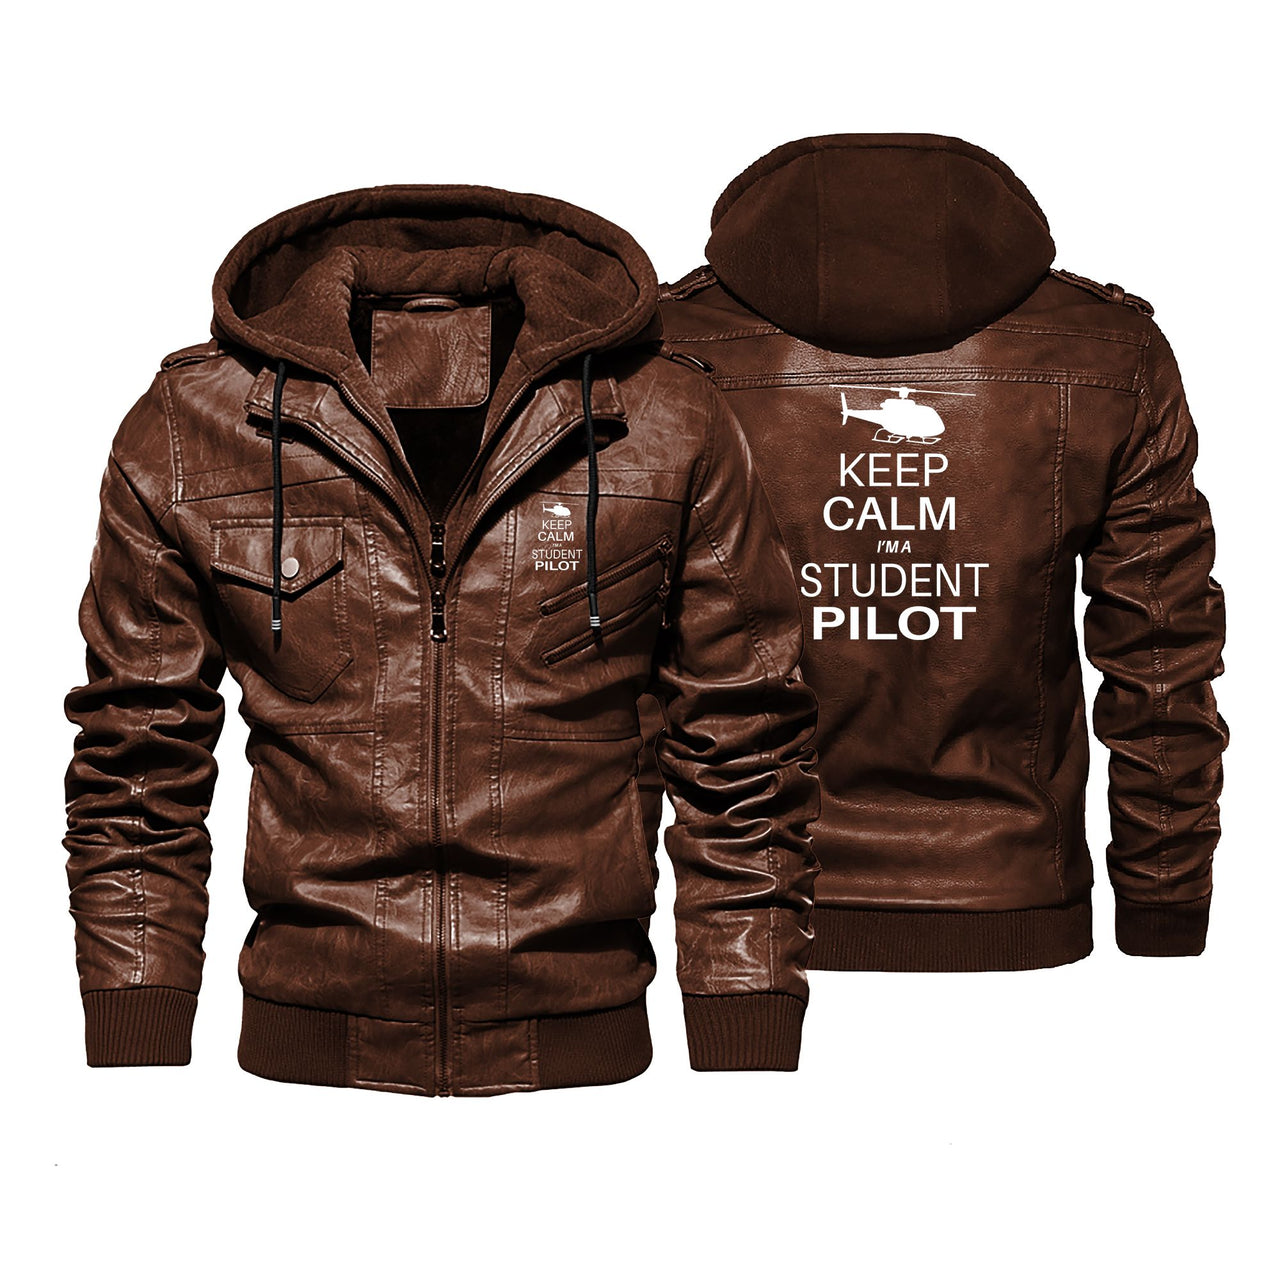 Student Pilot (Helicopter) Designed Hooded Leather Jackets